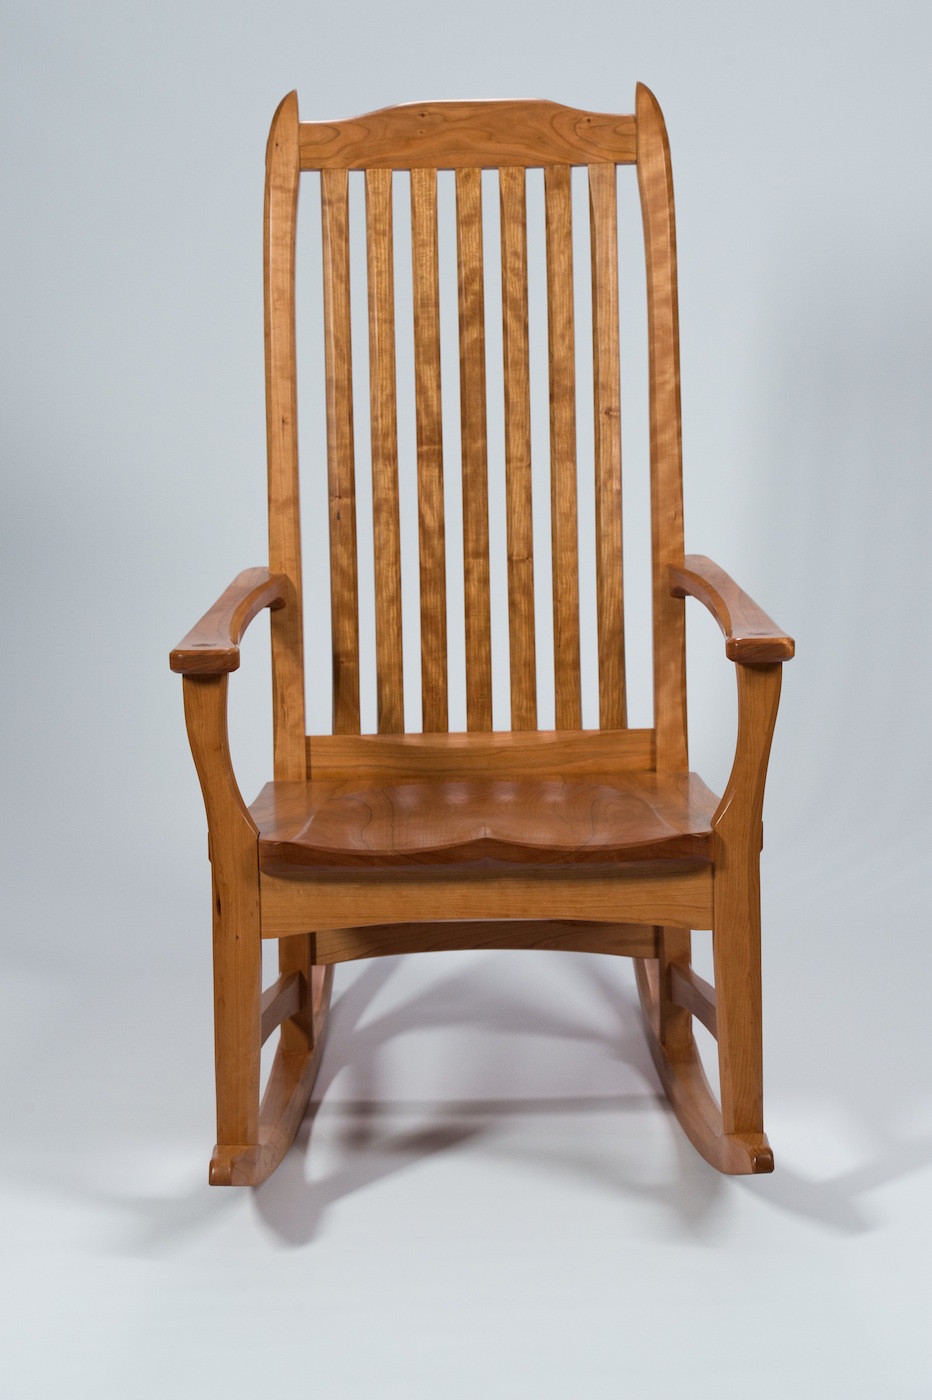 Build a Brazos Rocking Chair  12 day class The 